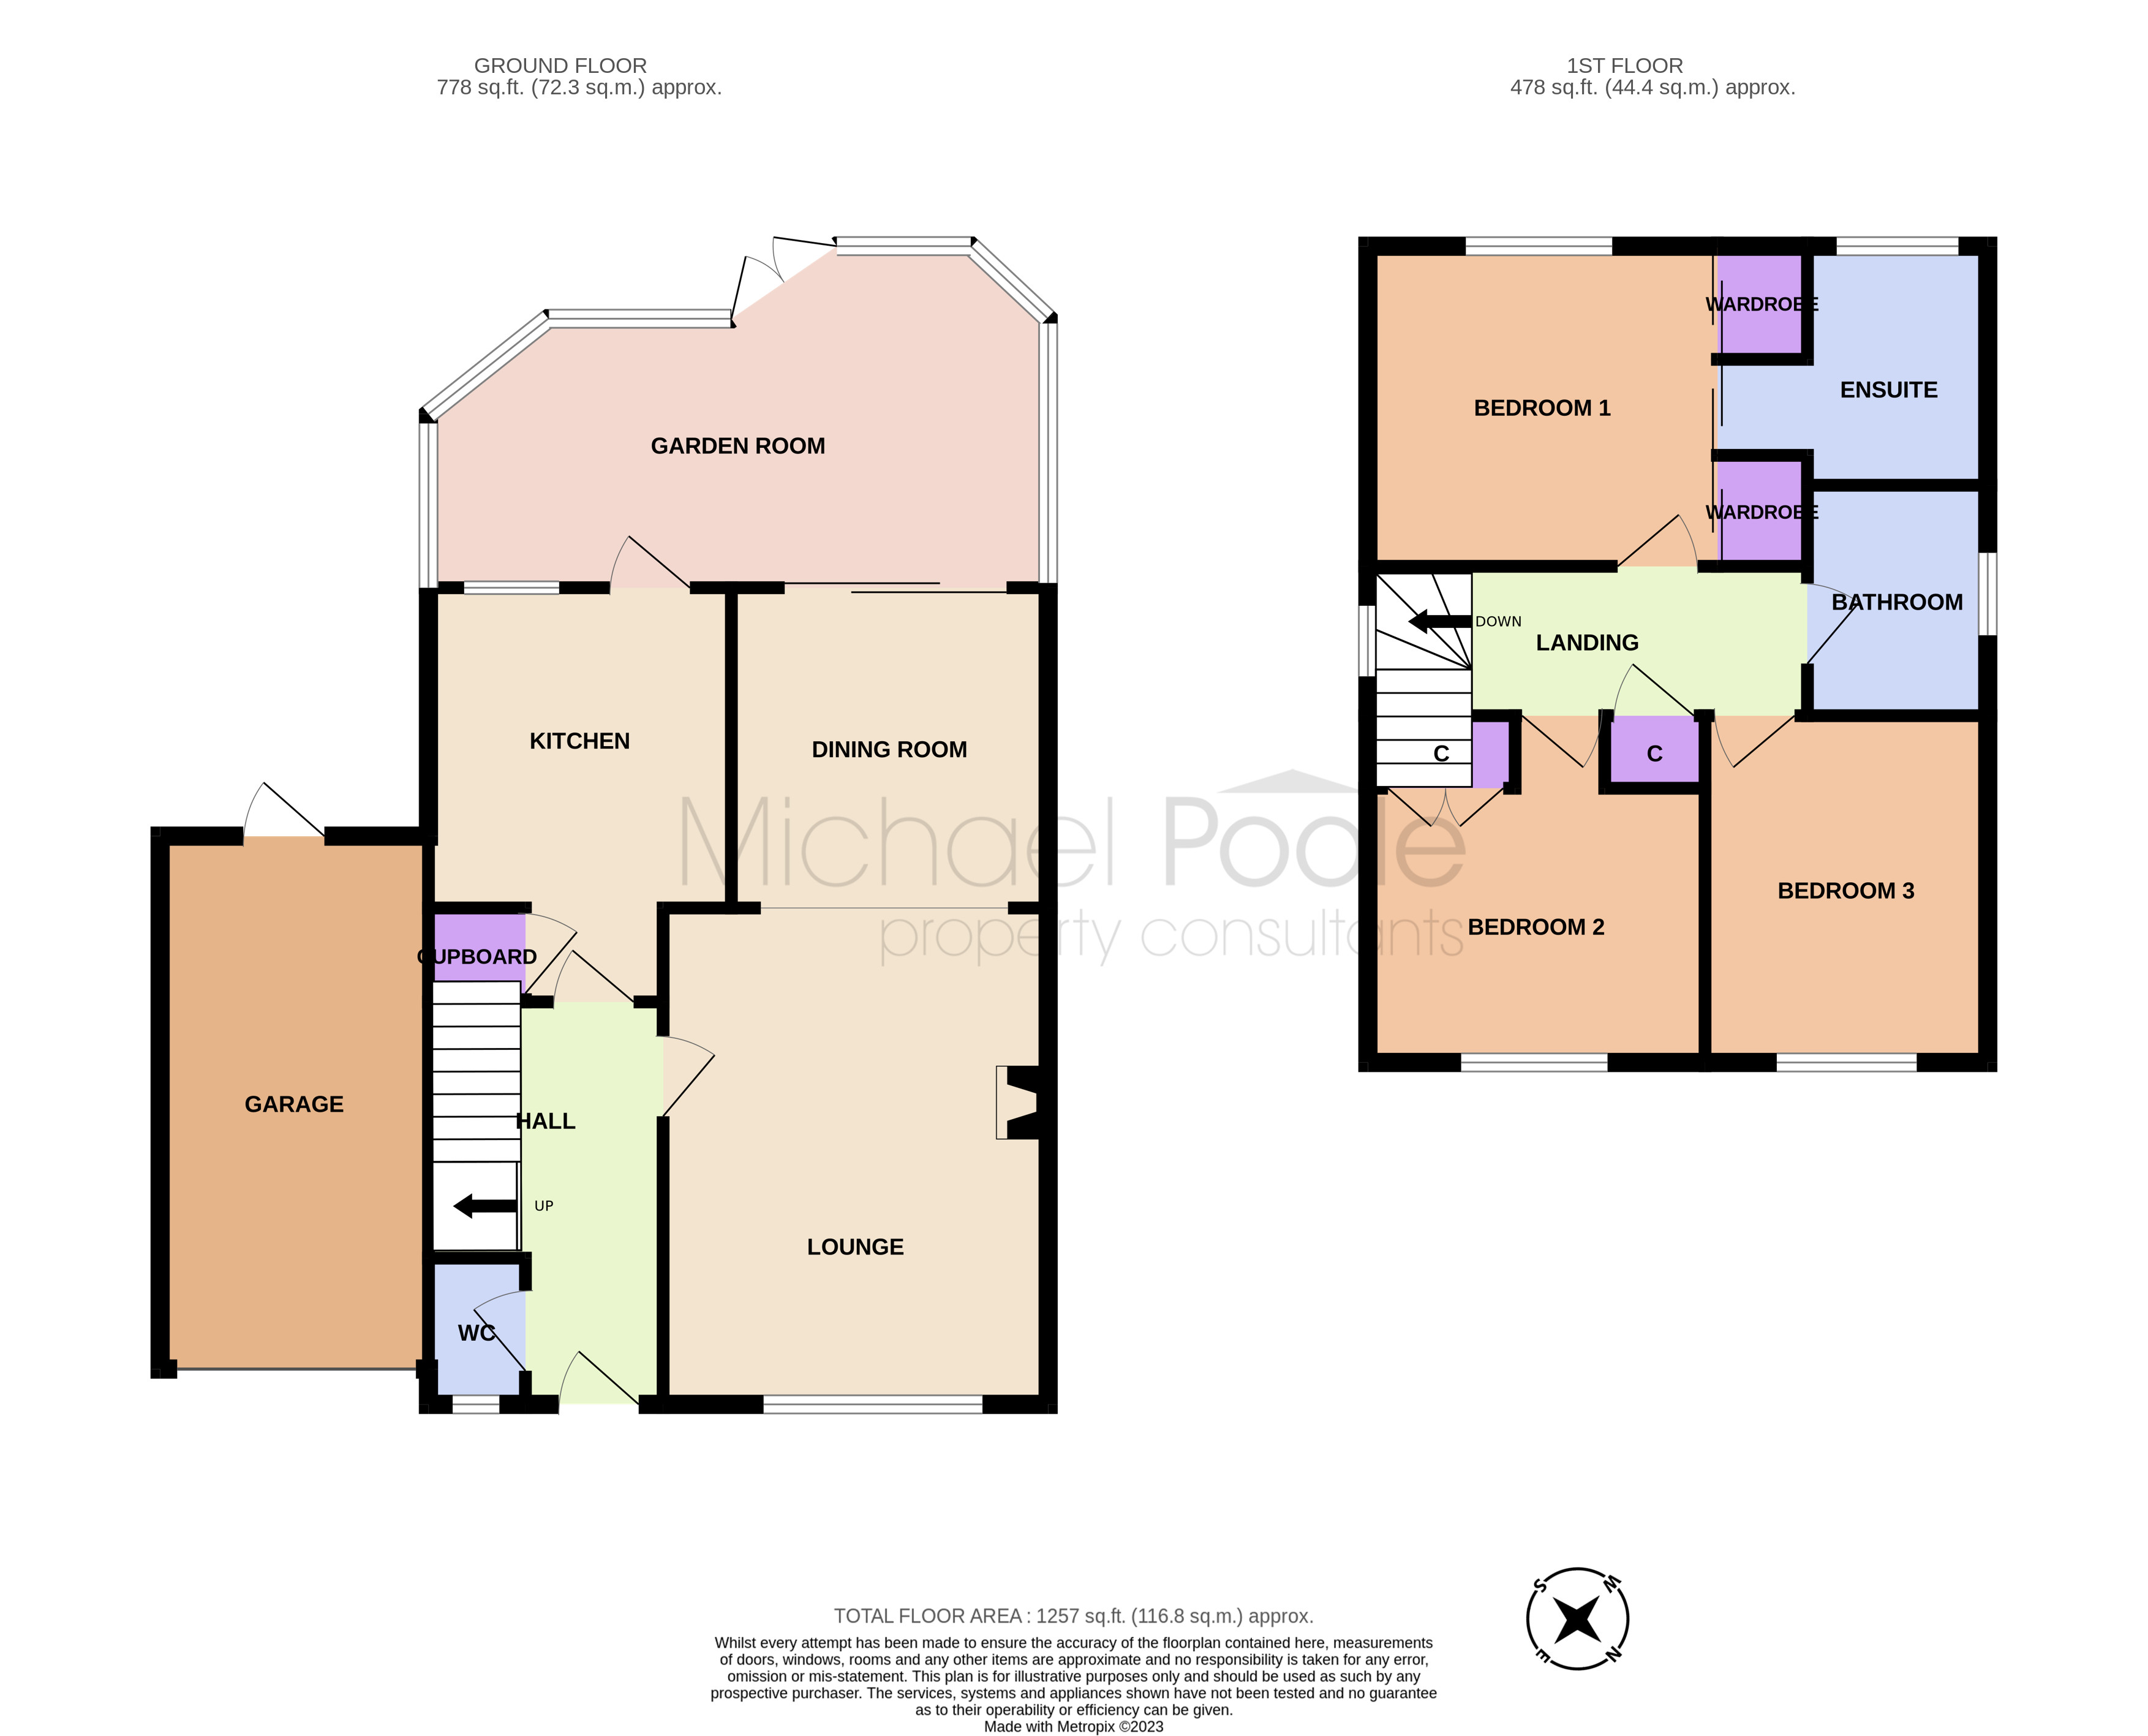 3 bed house for sale - Property floorplan